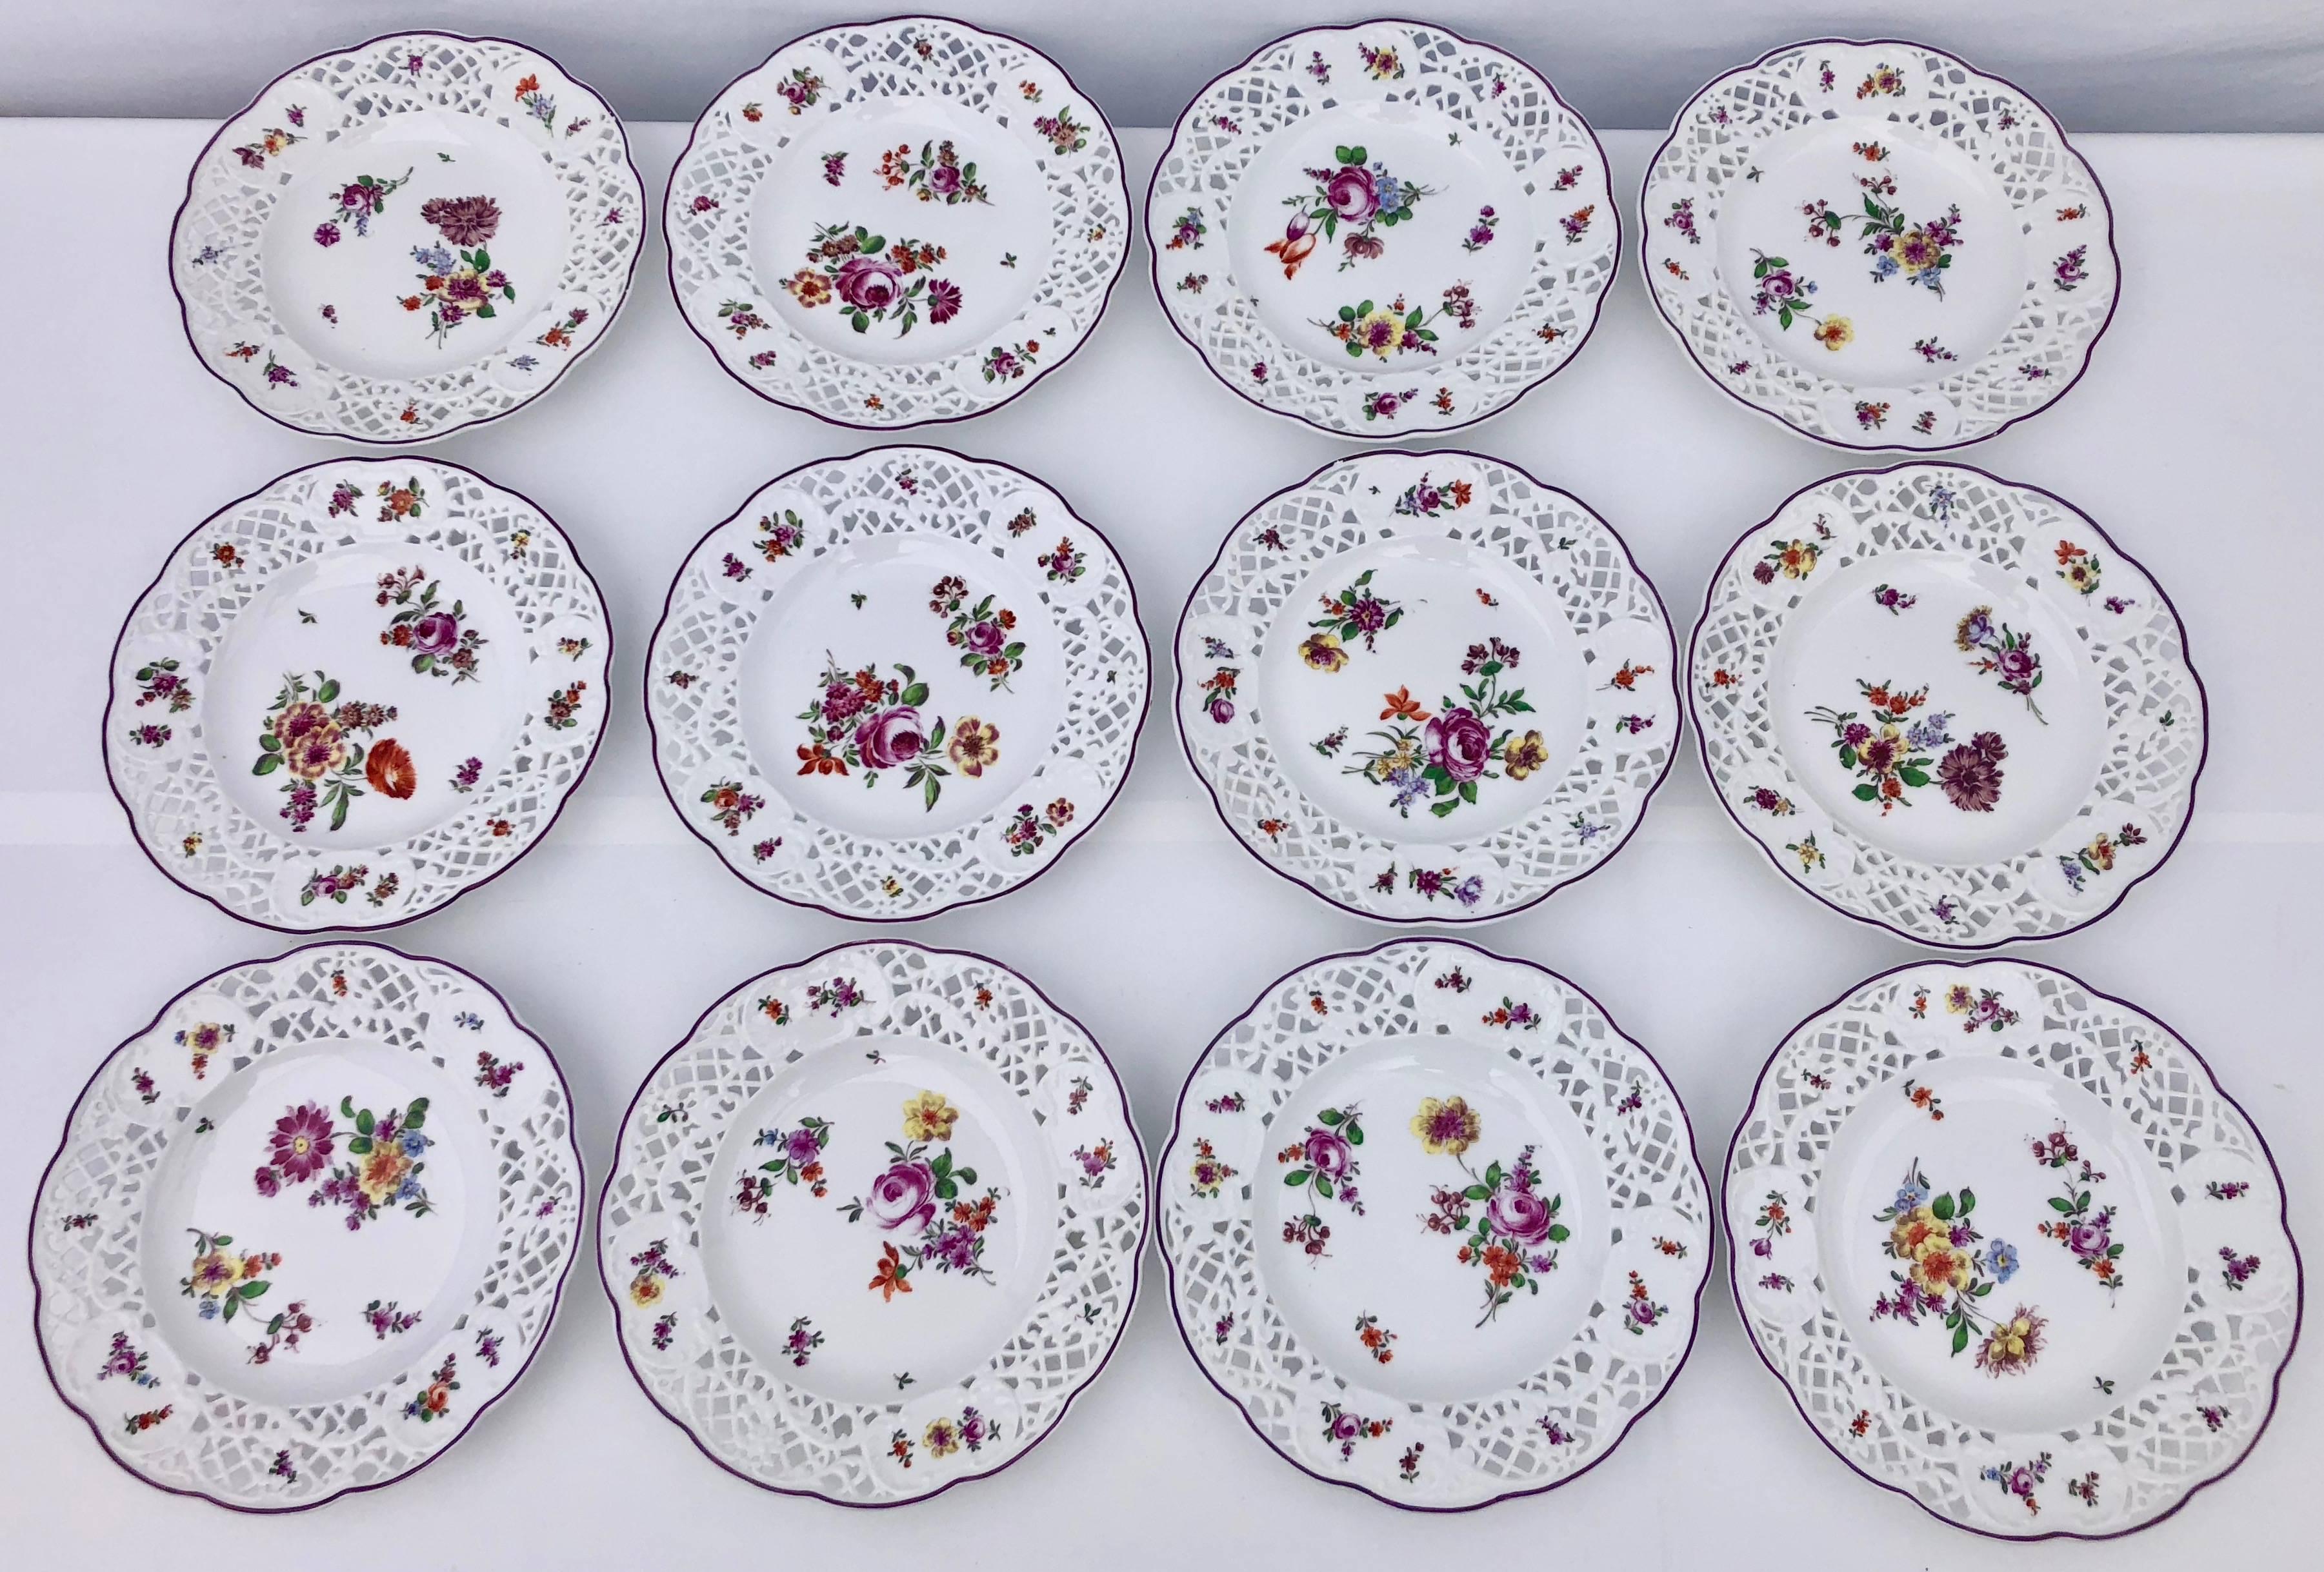 24 Meissen Plates with Reticulated Borders and Floral Decoration, Early 1900s (Französisch) im Angebot